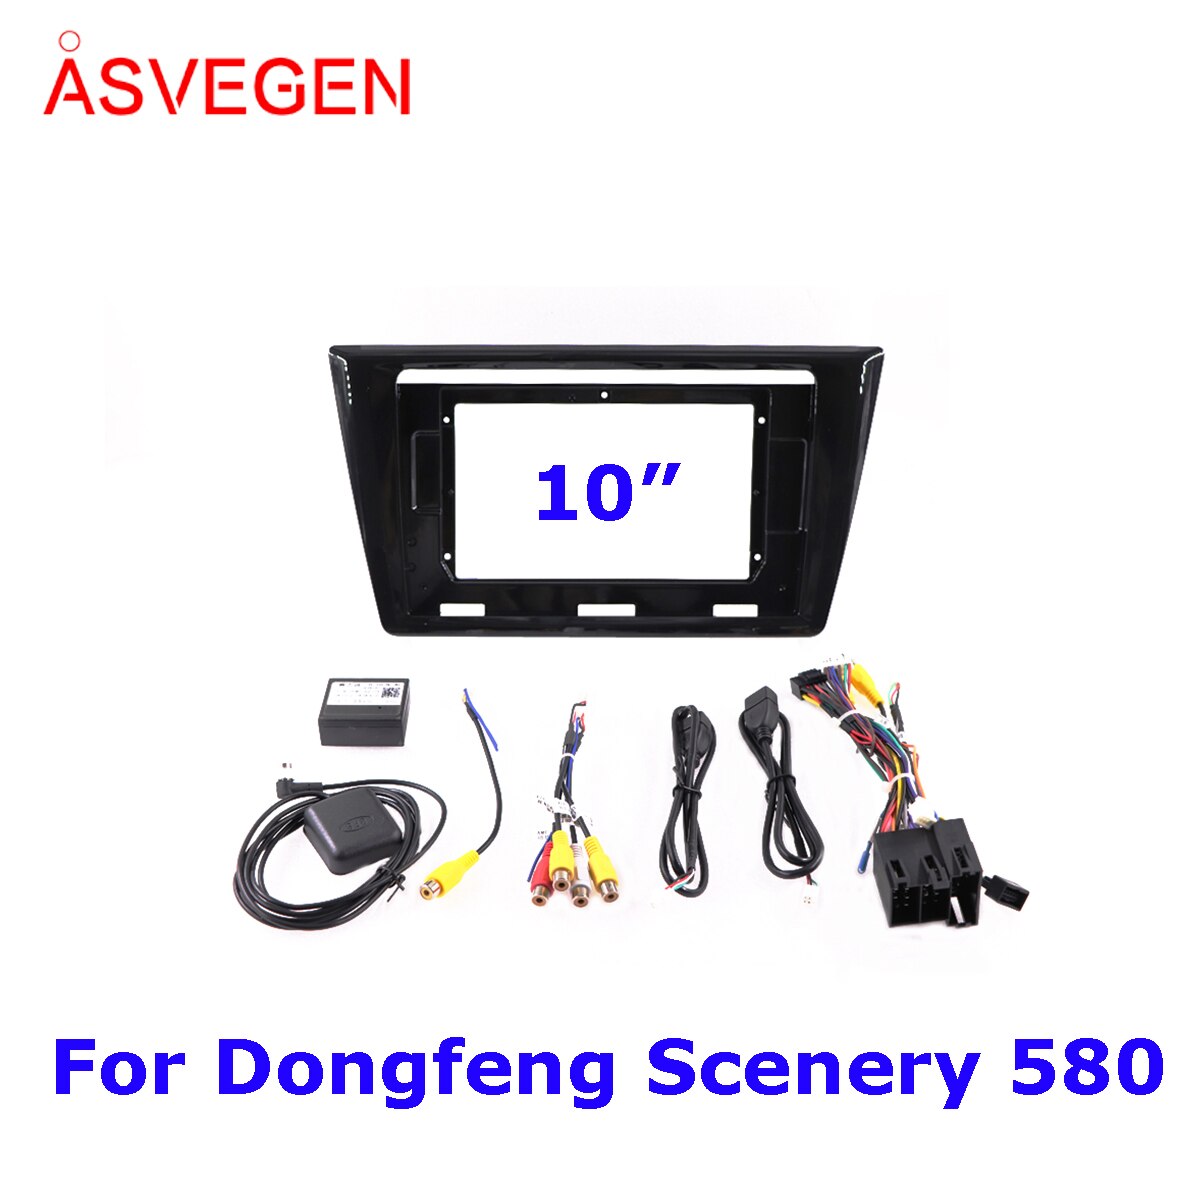 DongFeng Scenery 580  Dvd  ġ г  ..